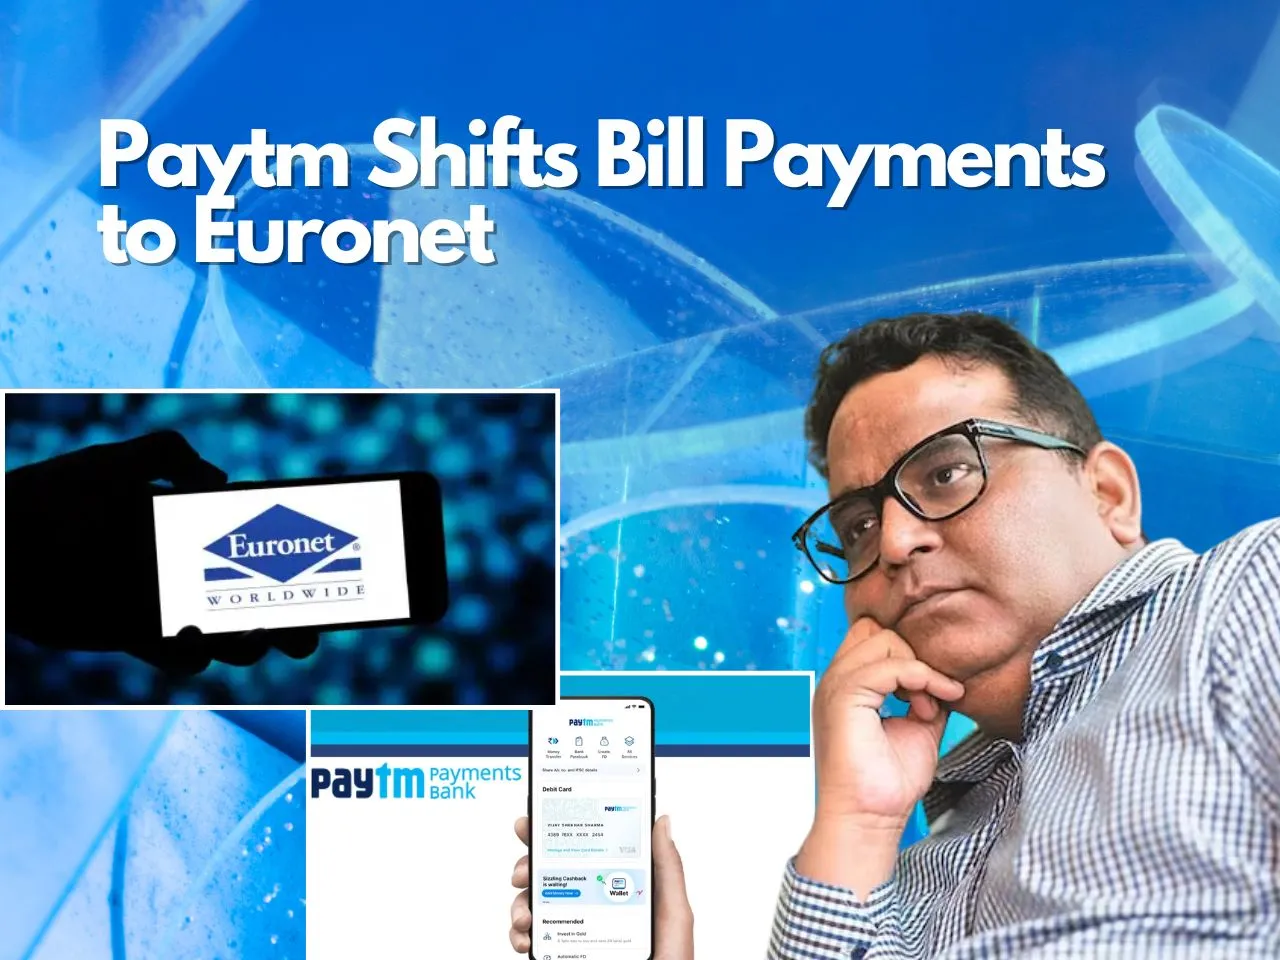 Paytm Payment Bank Shifts Bill Pay to Euronet Amid Regulatory Shifts